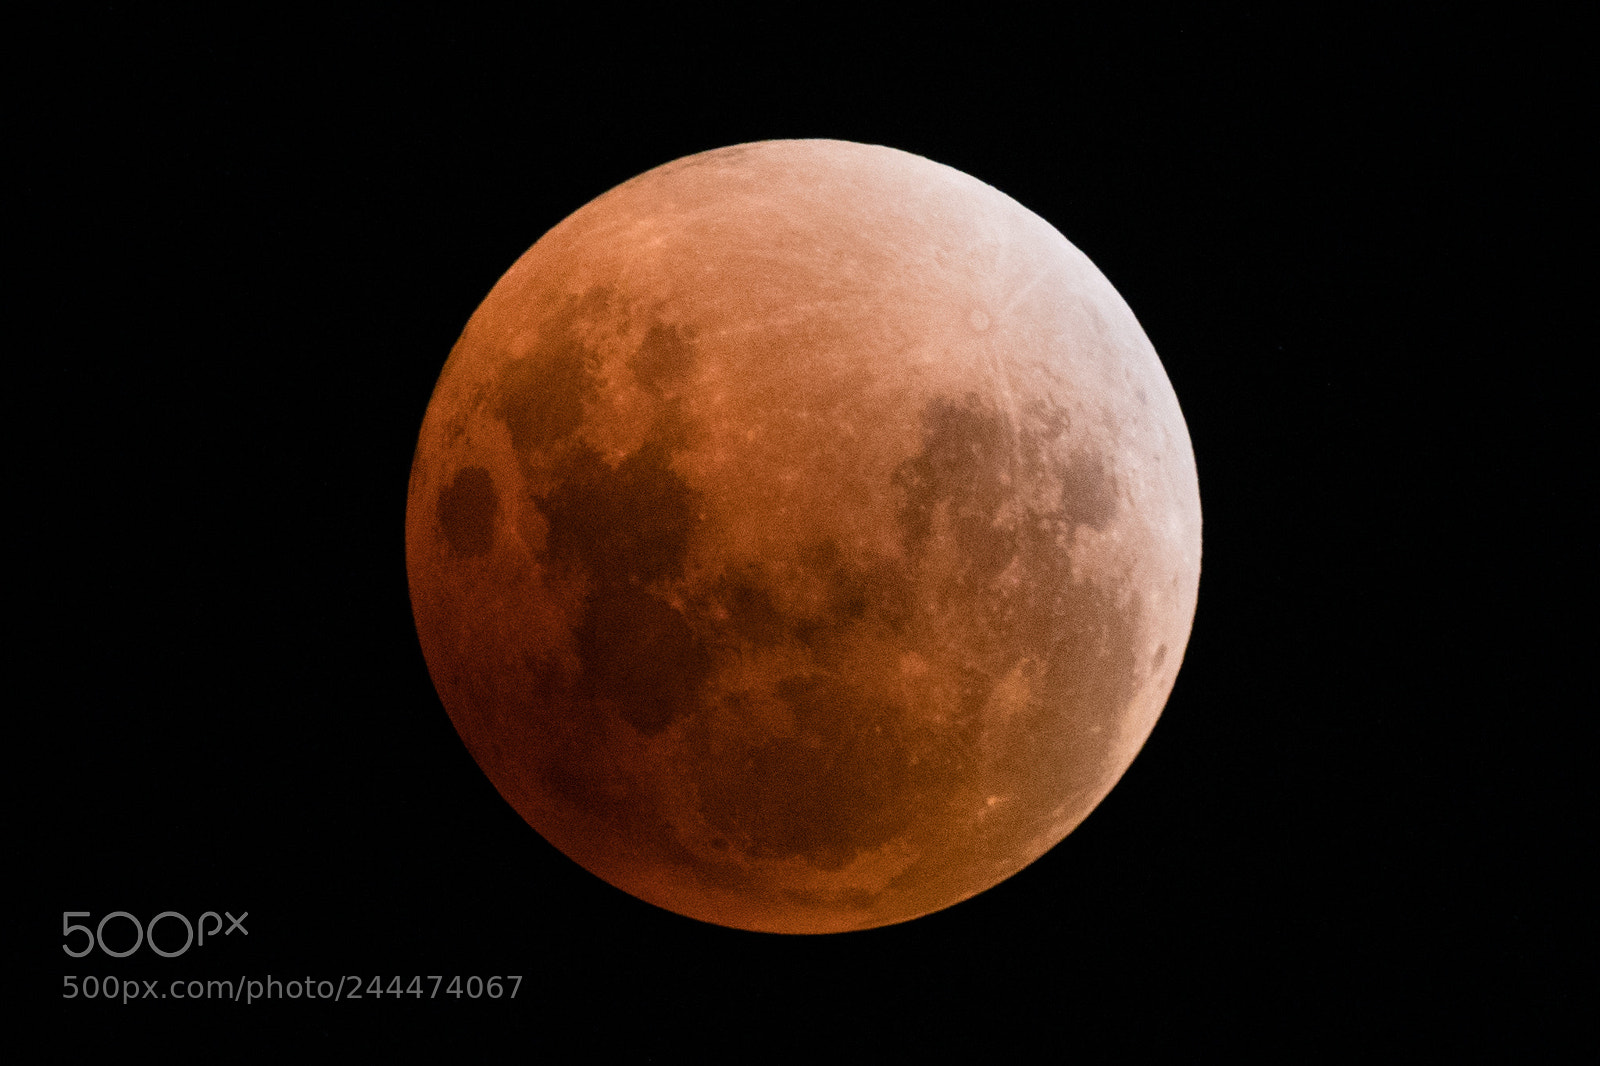 Sony a6300 sample photo. Blood moon lunar eclipse photography